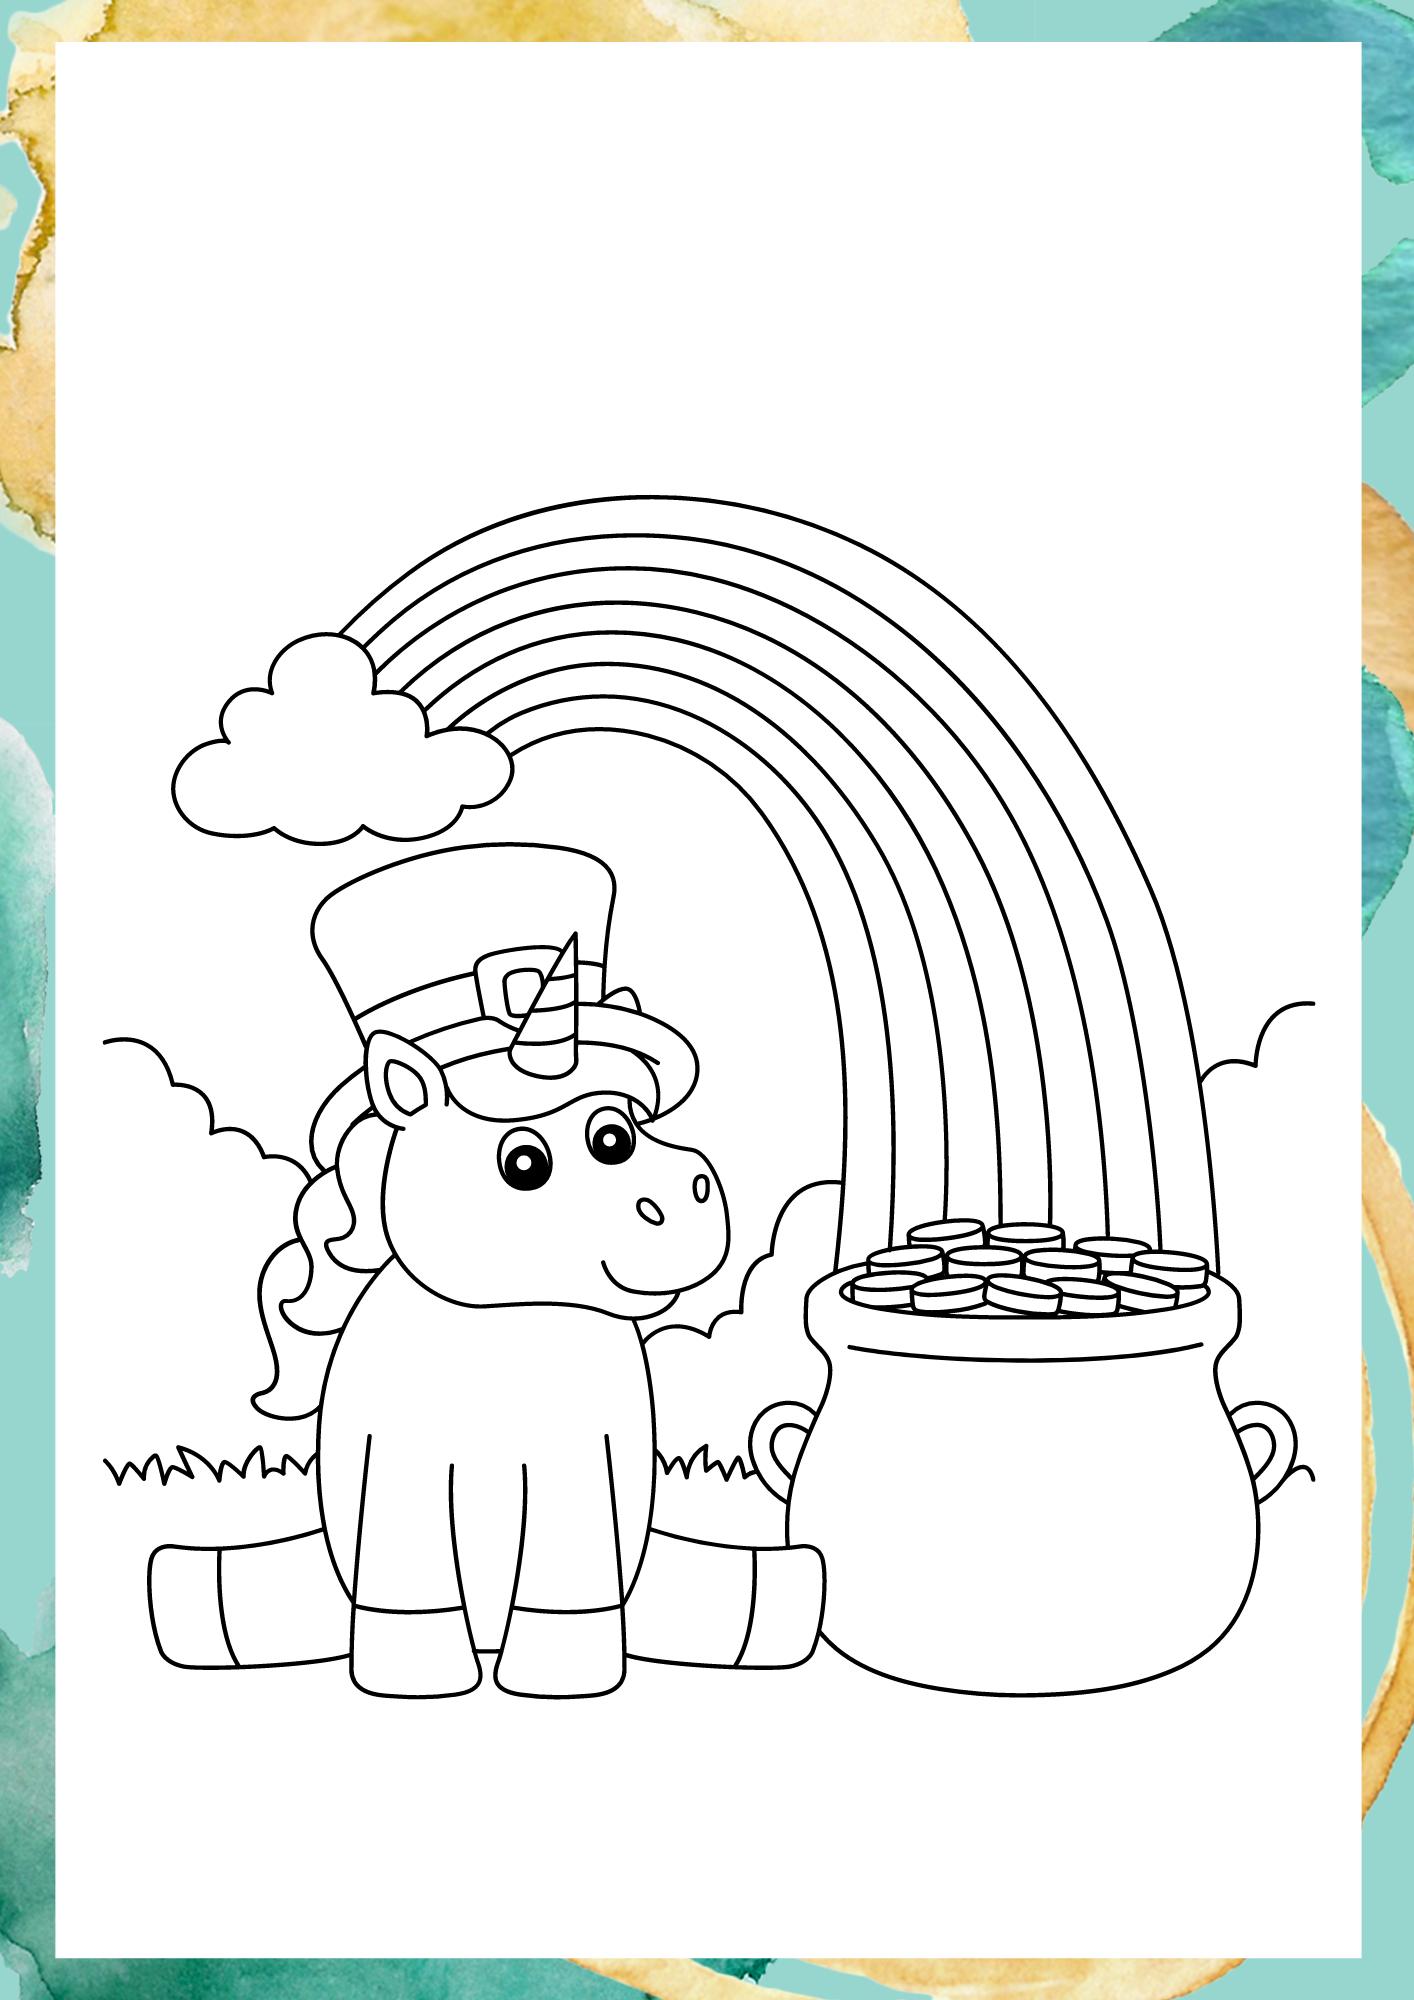 rainbow coloring page, unicorn coloring page, unicorn coloring pages, coloring page, coloring page for toddlers, Coloring Page, coloring sheet, happy color, colouring, free coloring pages, coloring pages for kids, printable coloring pages, cute coloring pages, colouring pages, colouring to print, free printable coloring pages, free coloring pages for kids, easy coloring pages, coloring sheets